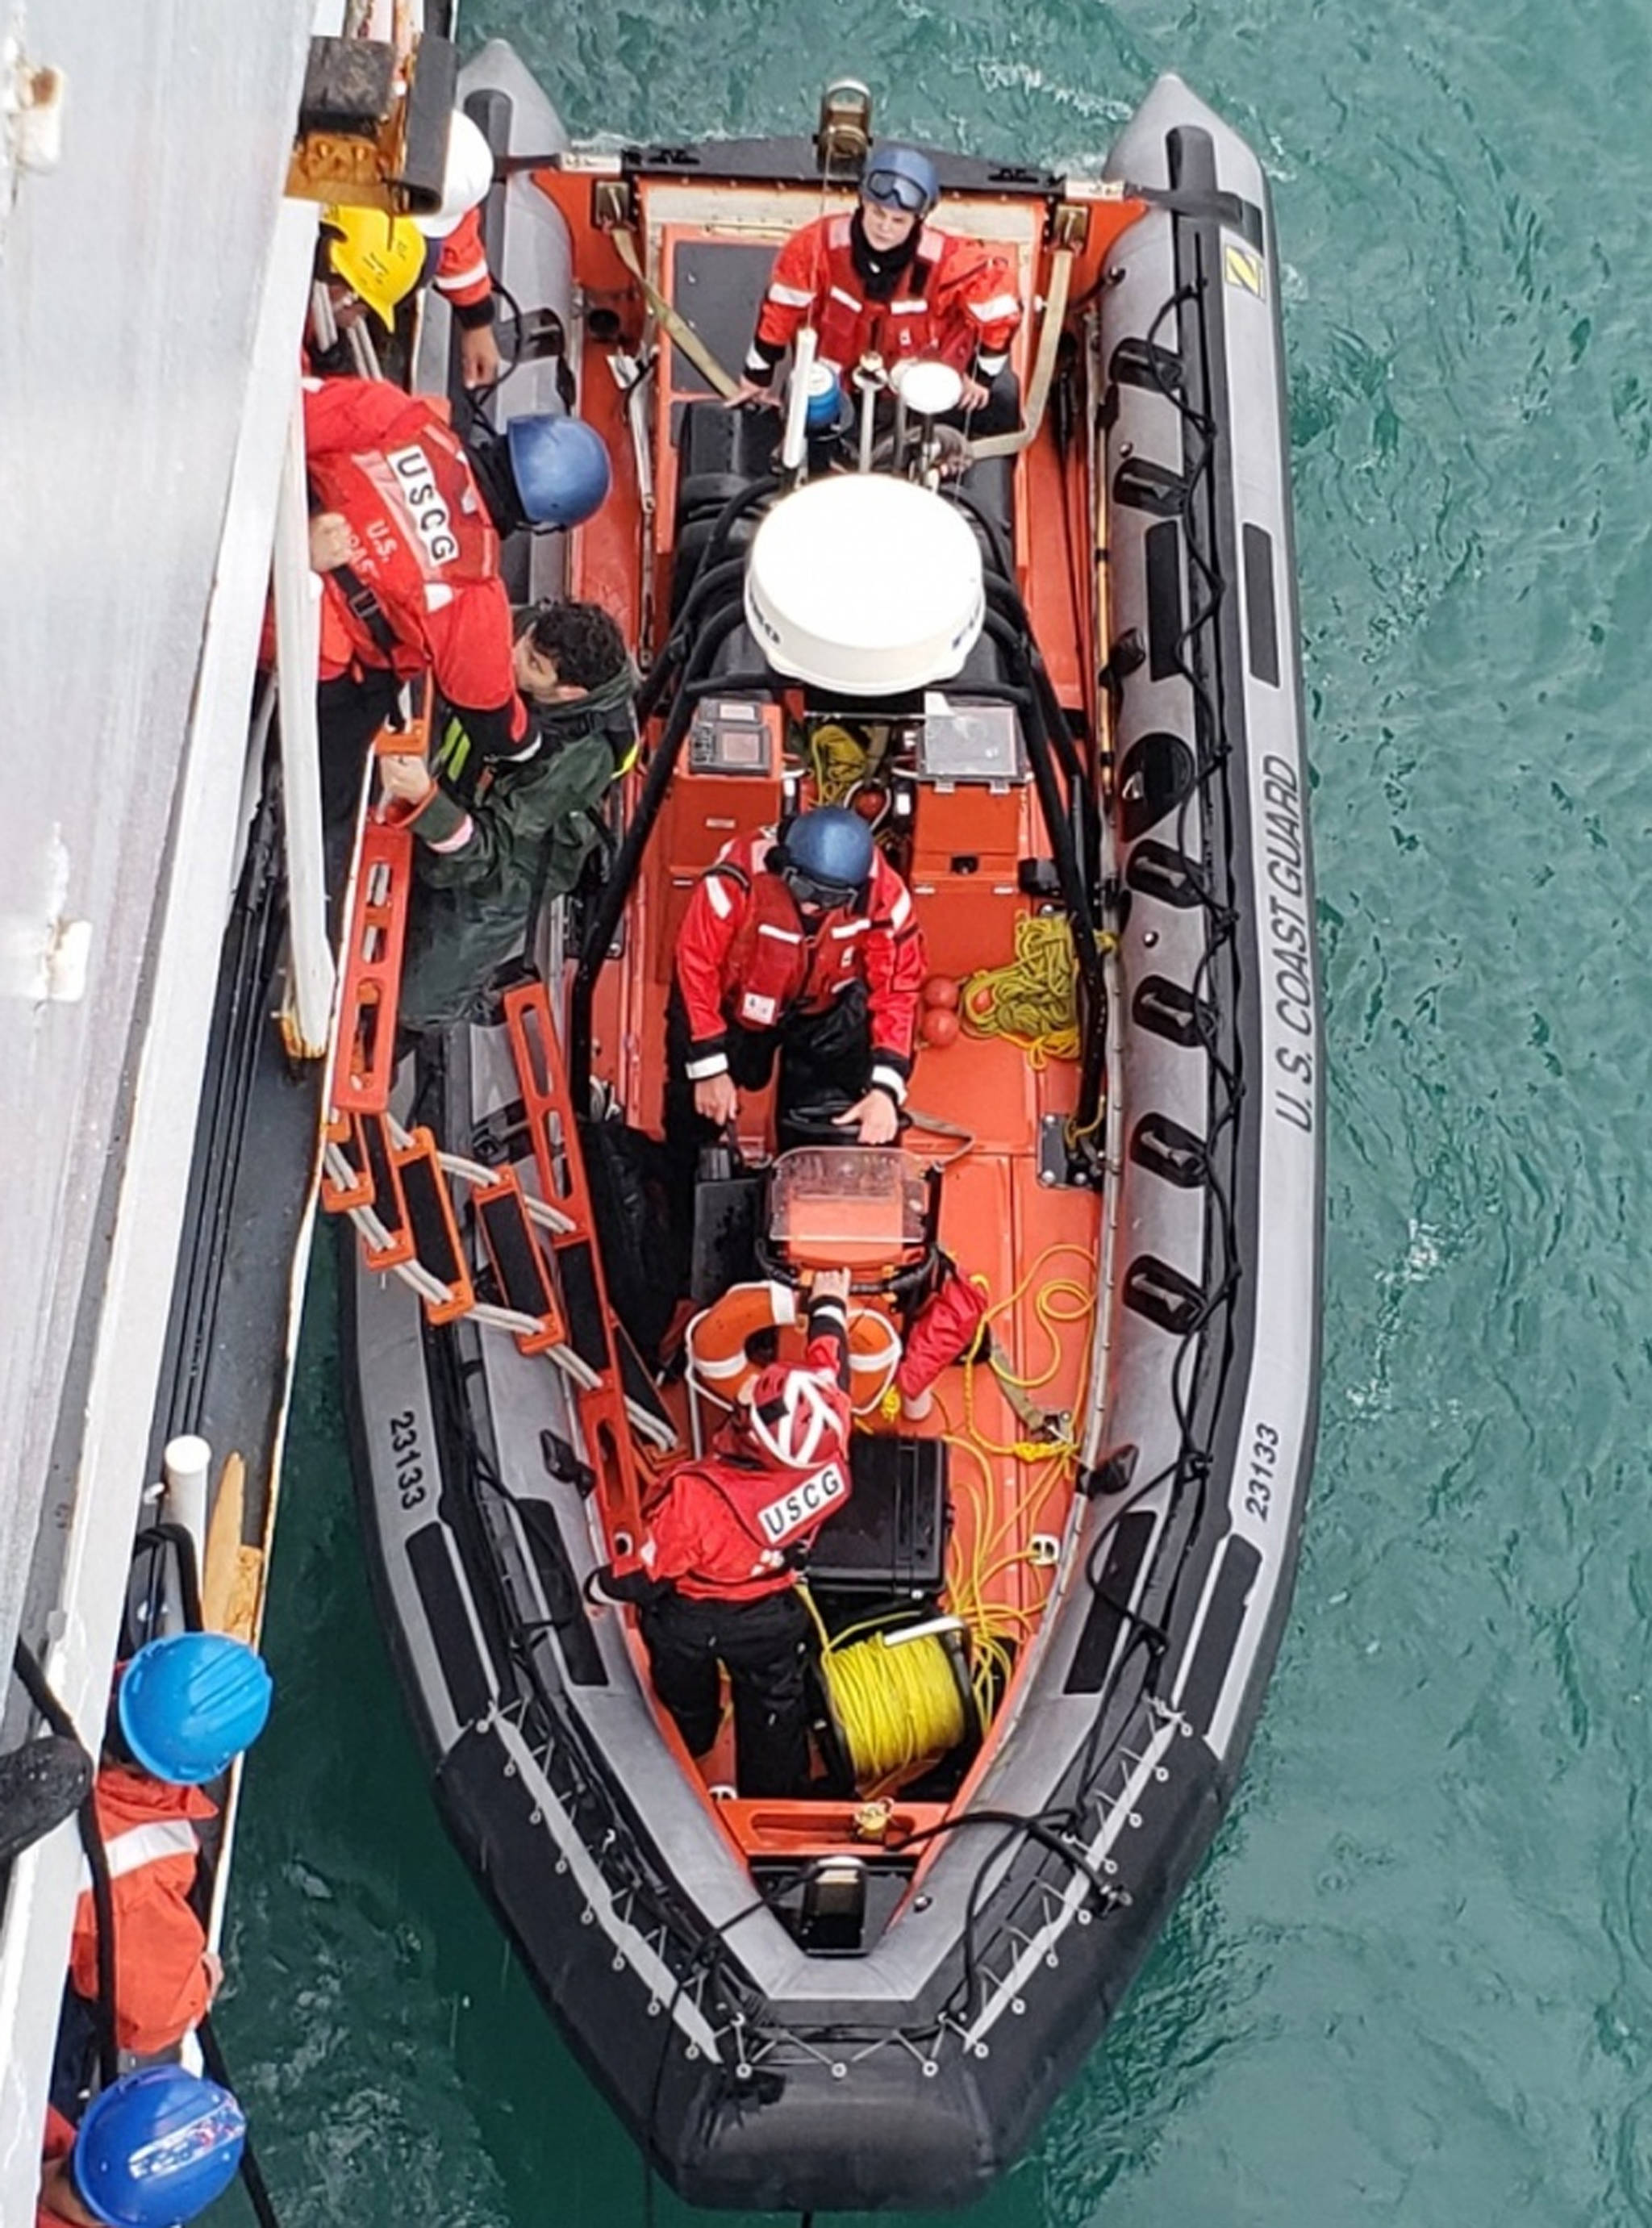 Coast Guard Cutter Douglas Munro crew members assist a survivor off a Coast Guard small boat in Glacier Bay National Park, July 15, 2018. Rough waters overturned four kayaks in Glacier Bay National Park, but the individuals made it to shore and activated their personal locator beacon, which assisted the Coast Guard in locating them. (U.S. Coast Guard | Courtesy Photo)